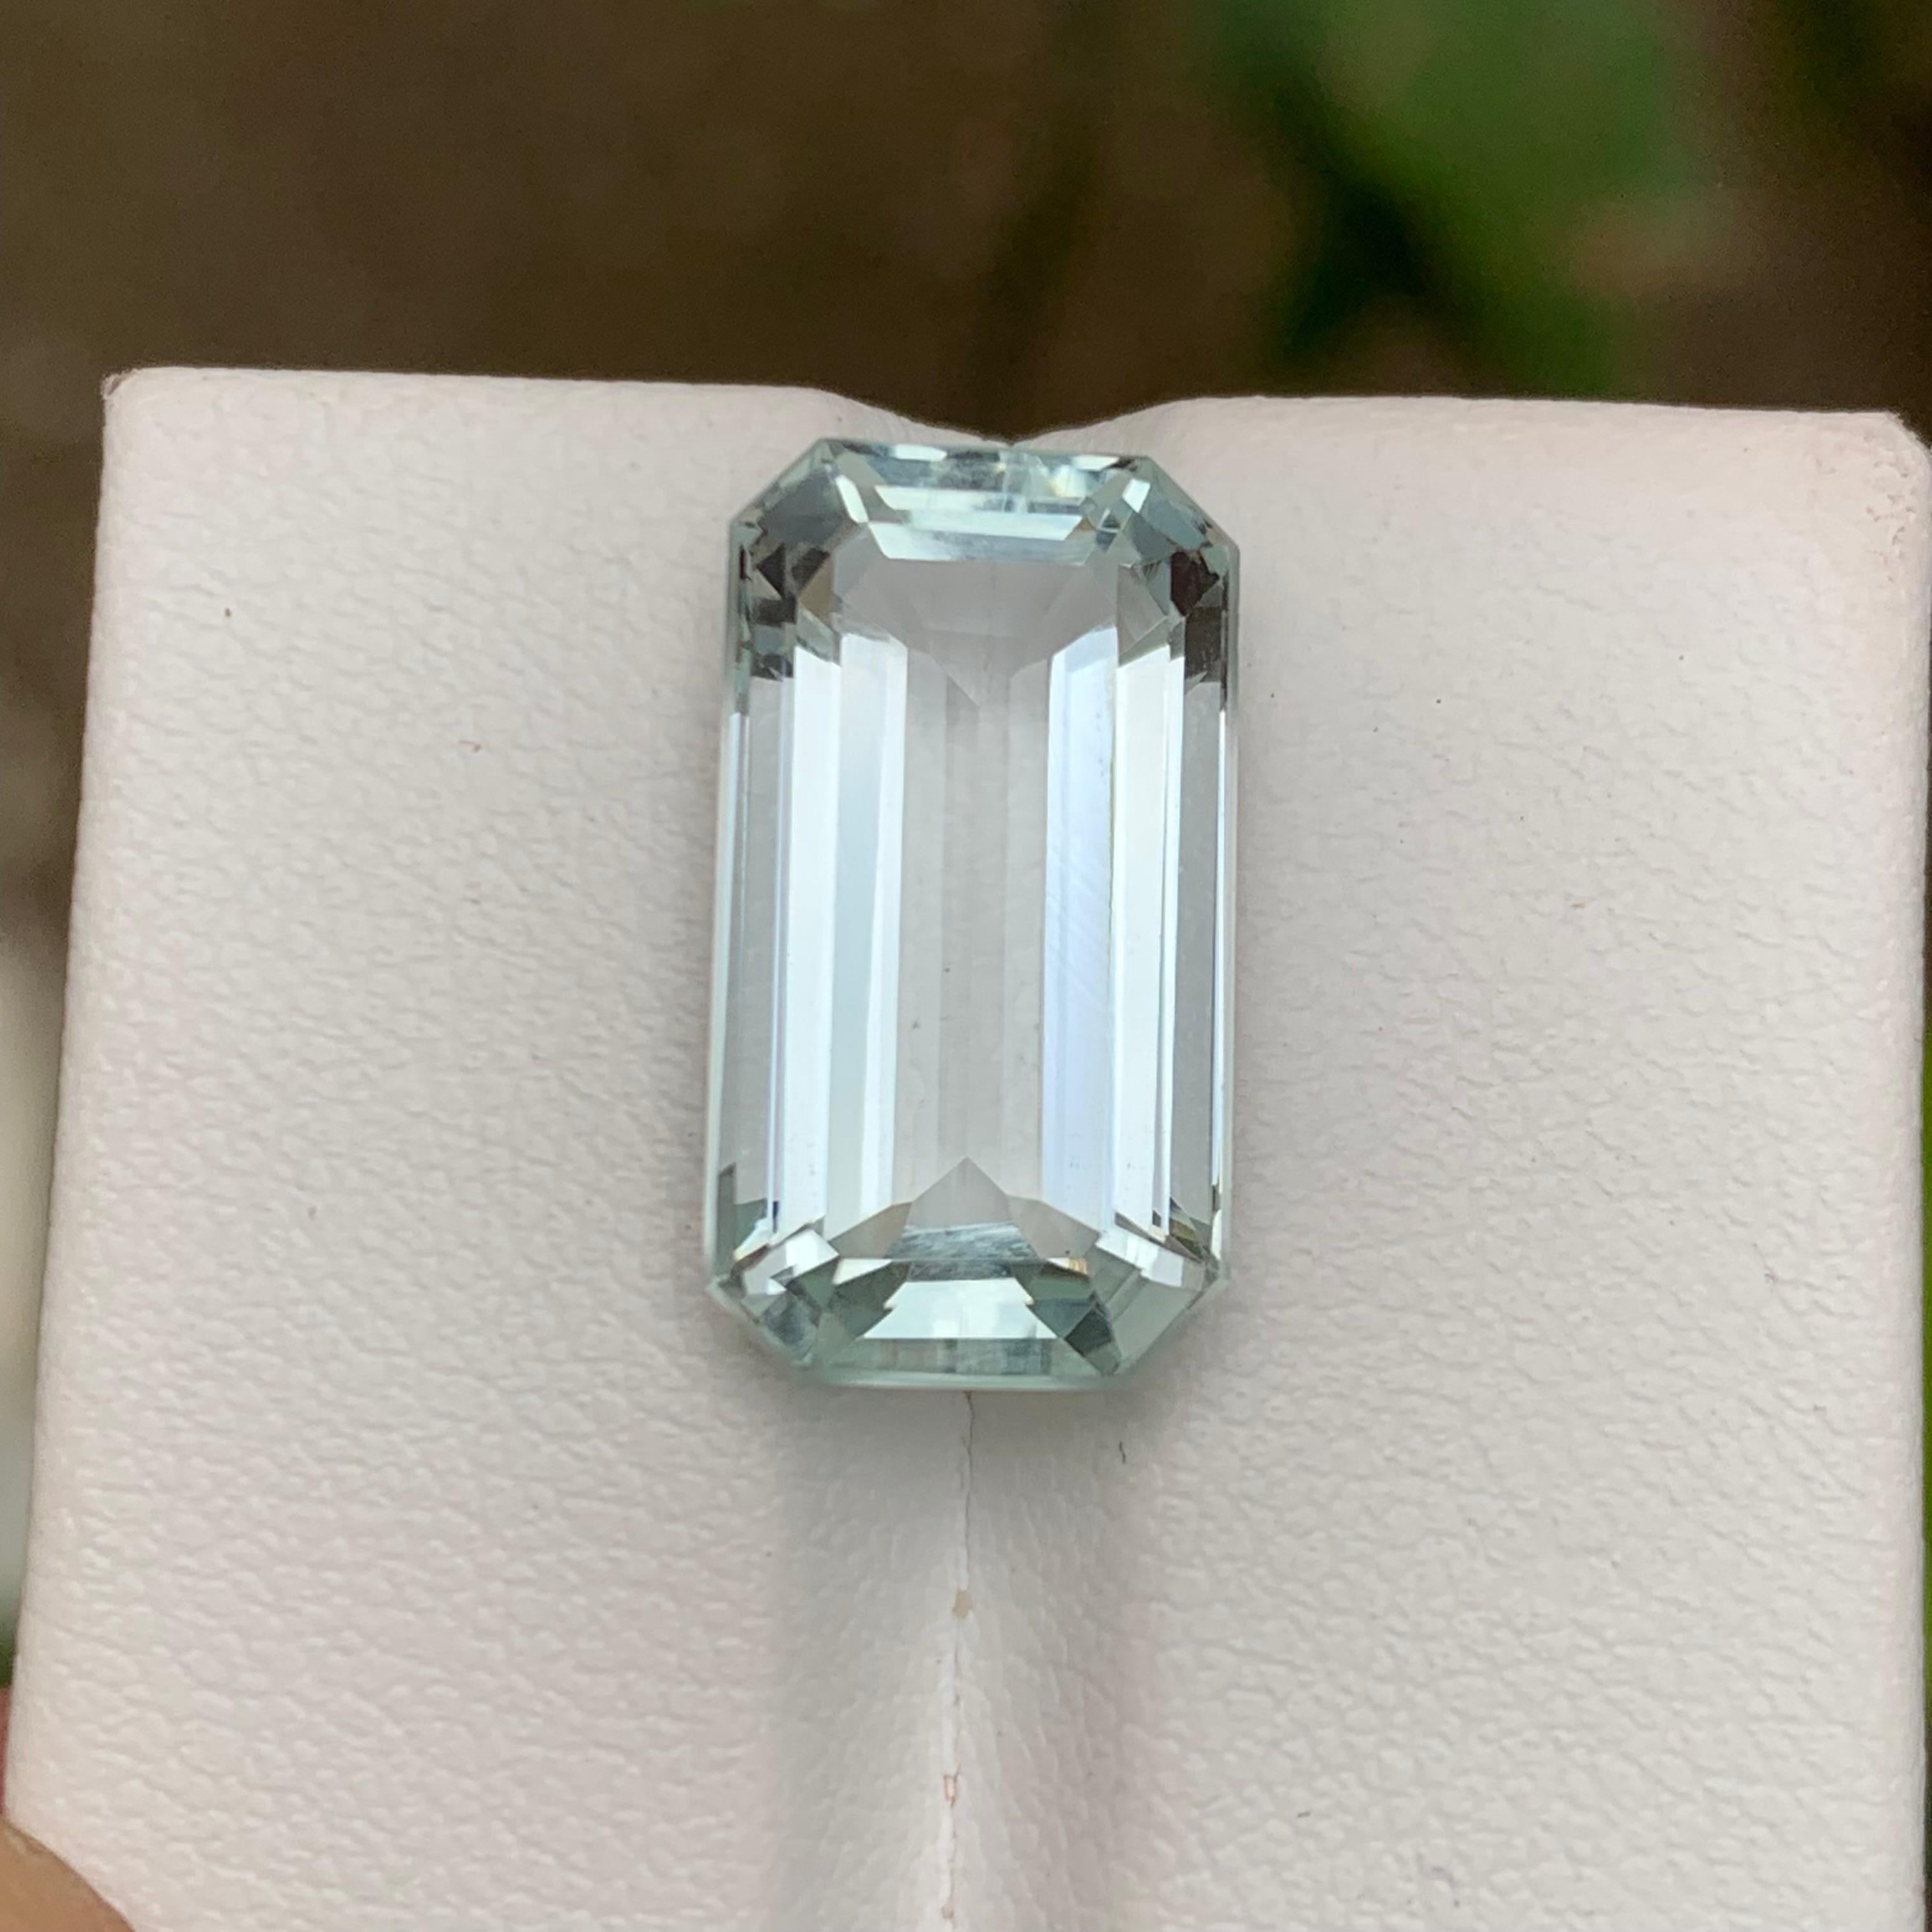 GEMSTONE TYPE: Aquamarine 
PIECE(S): 1
WEIGHT: 9.60 Carats
SHAPE: Step Emerald Cut
SIZE (MM): 17.99 x 9.73 x 7.14
COLOR: Pale Blue
CLARITY: Eye CLean
TREATMENT: None
ORIGIN: Pakistan
CERTIFICATE: On demand
(if you require a certificate, kindly